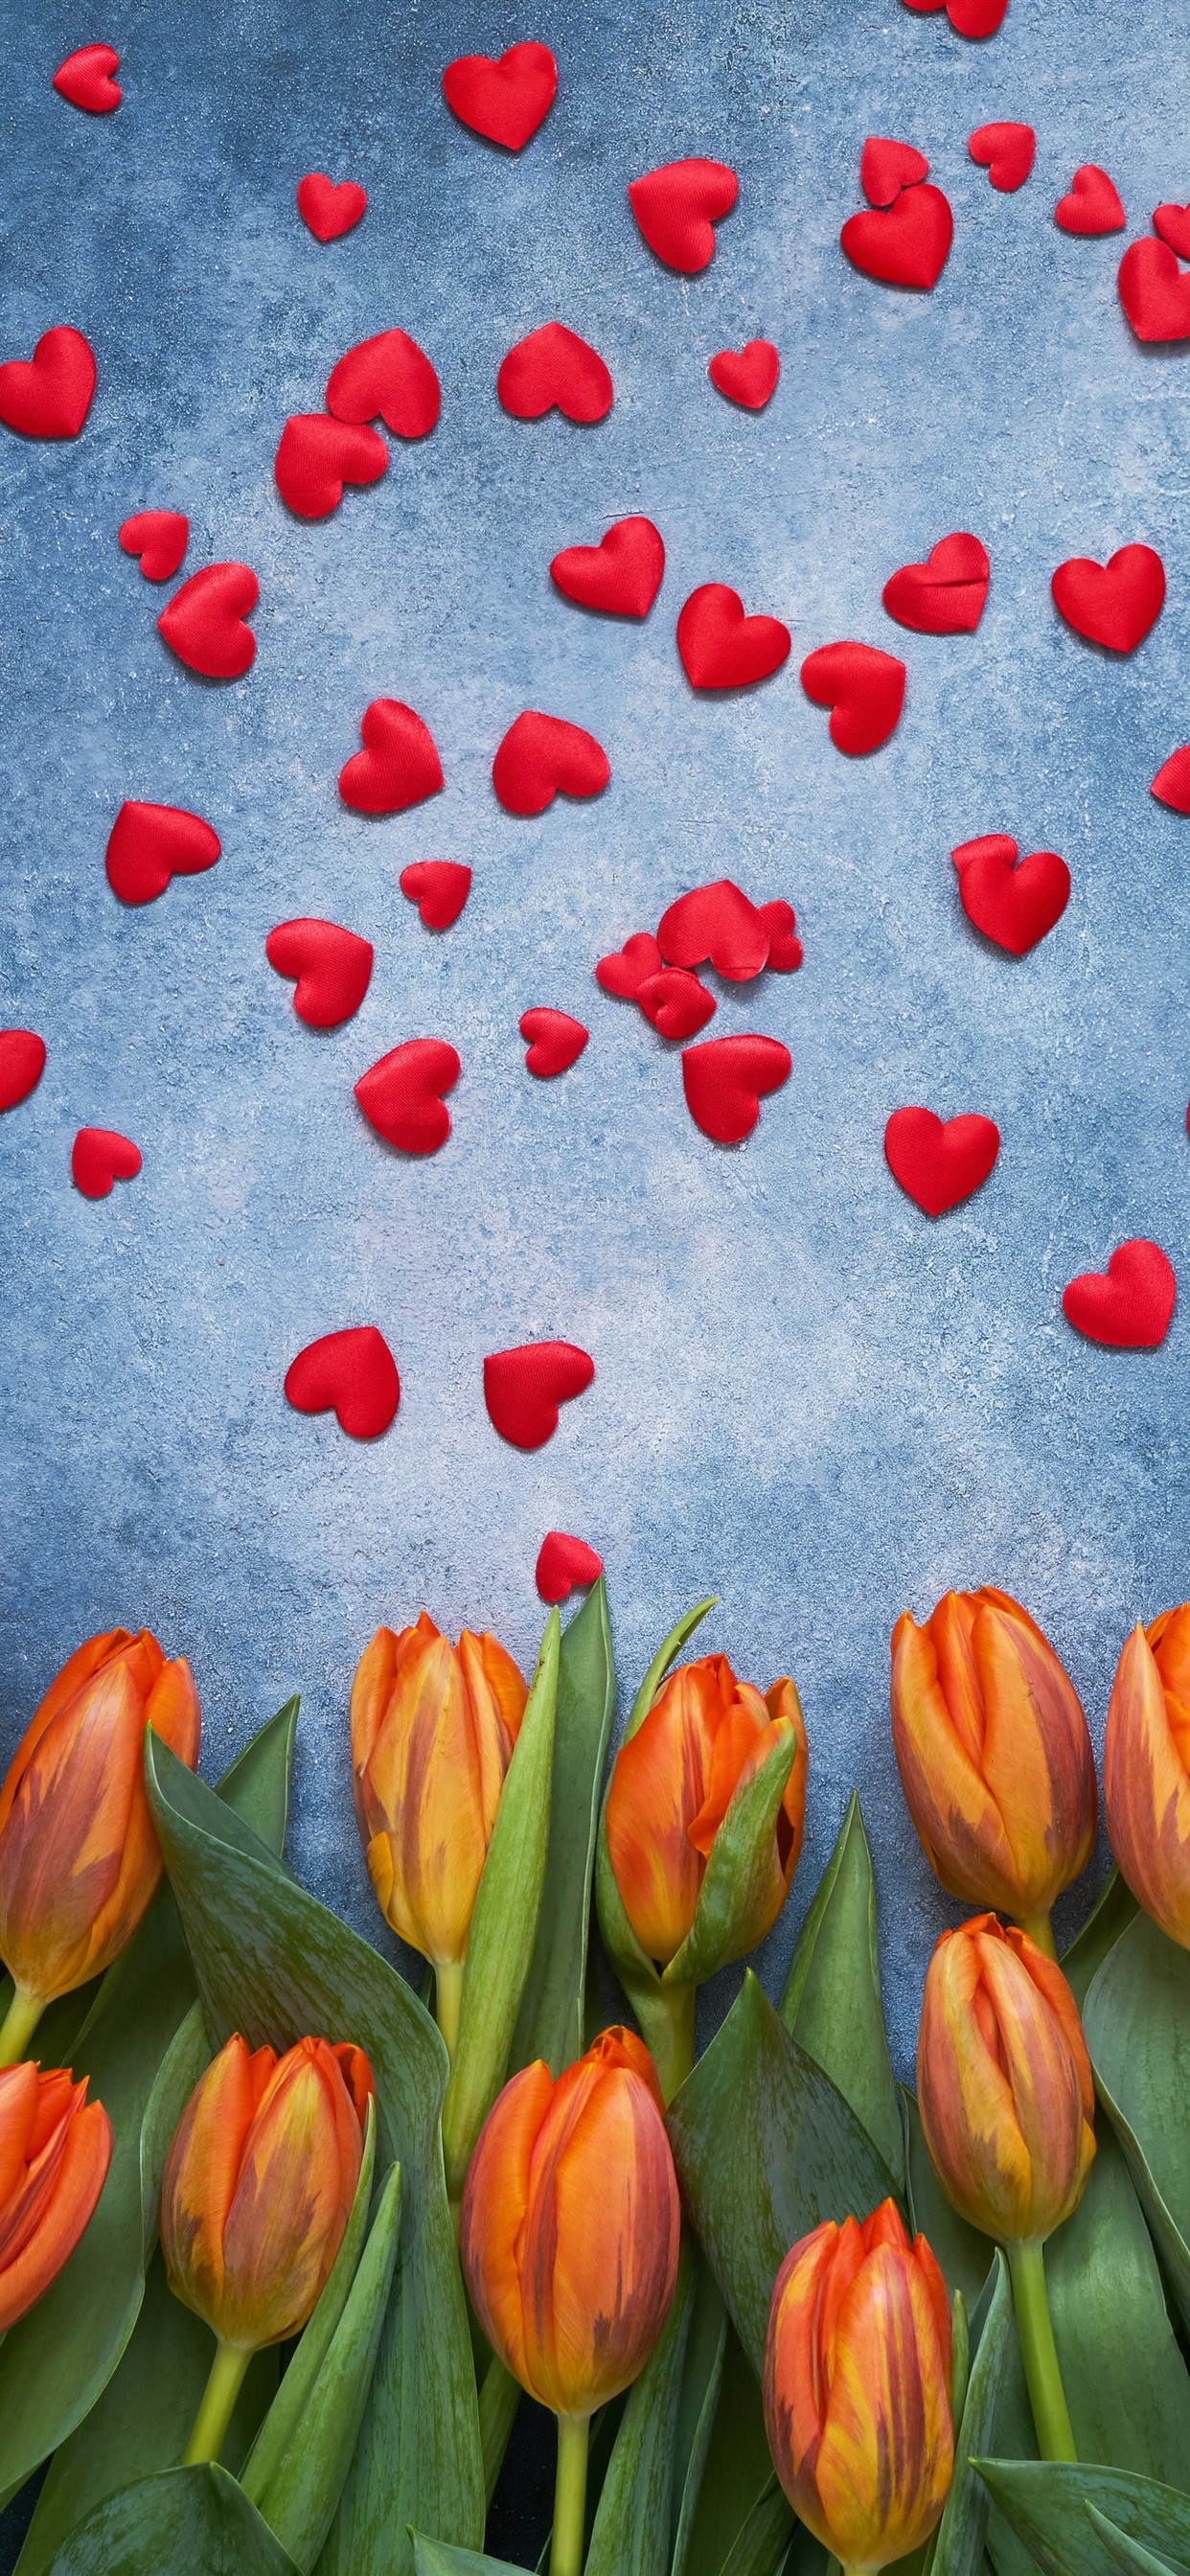 Wallpaper Orange tulips and many red love hearts 5120x2880 UHD 5K Picture, Image